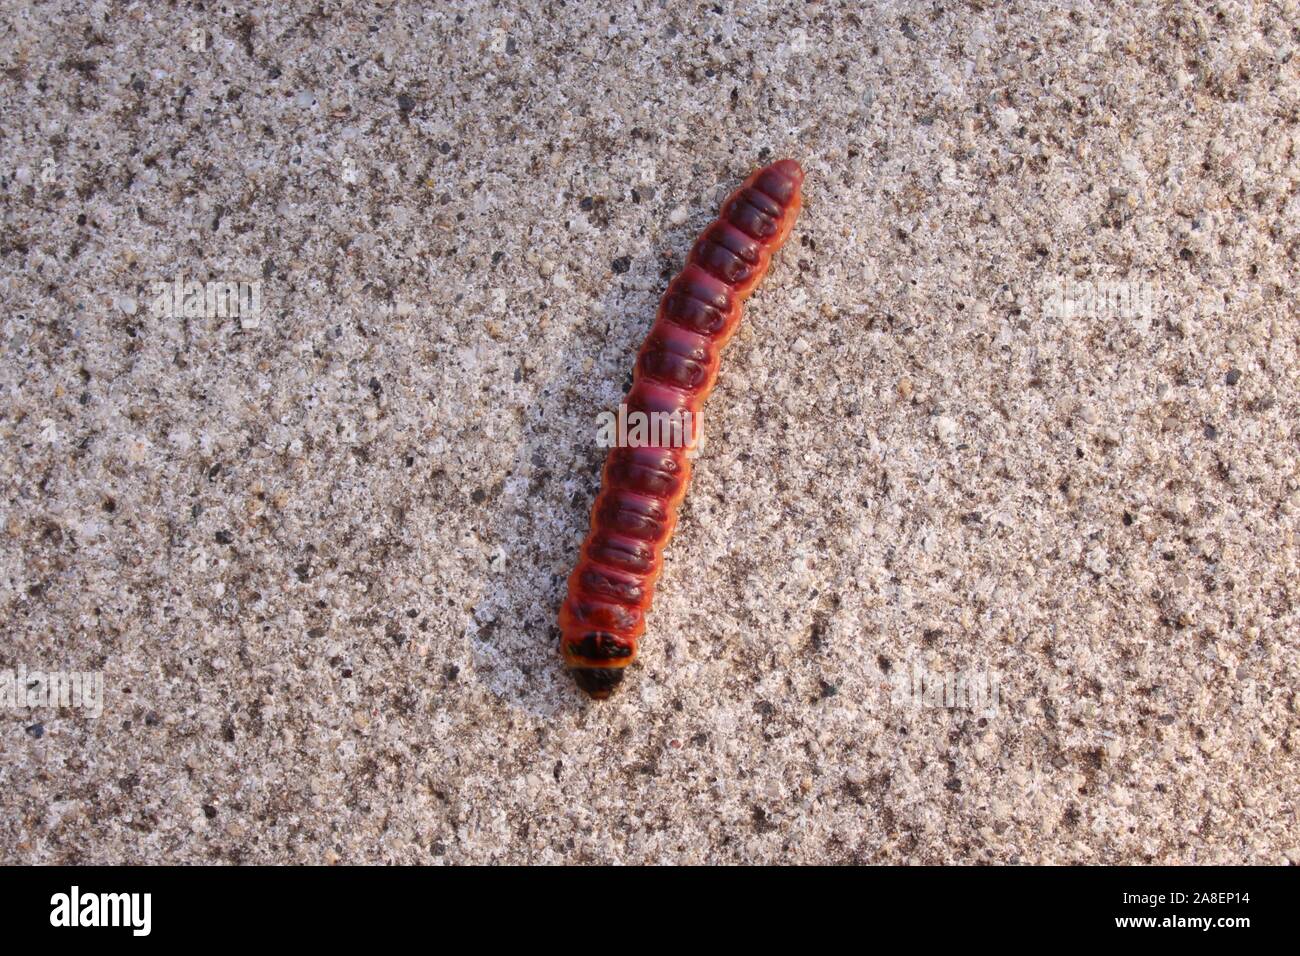 The picture shows a caterpillar of a European goat moth Stock Photo